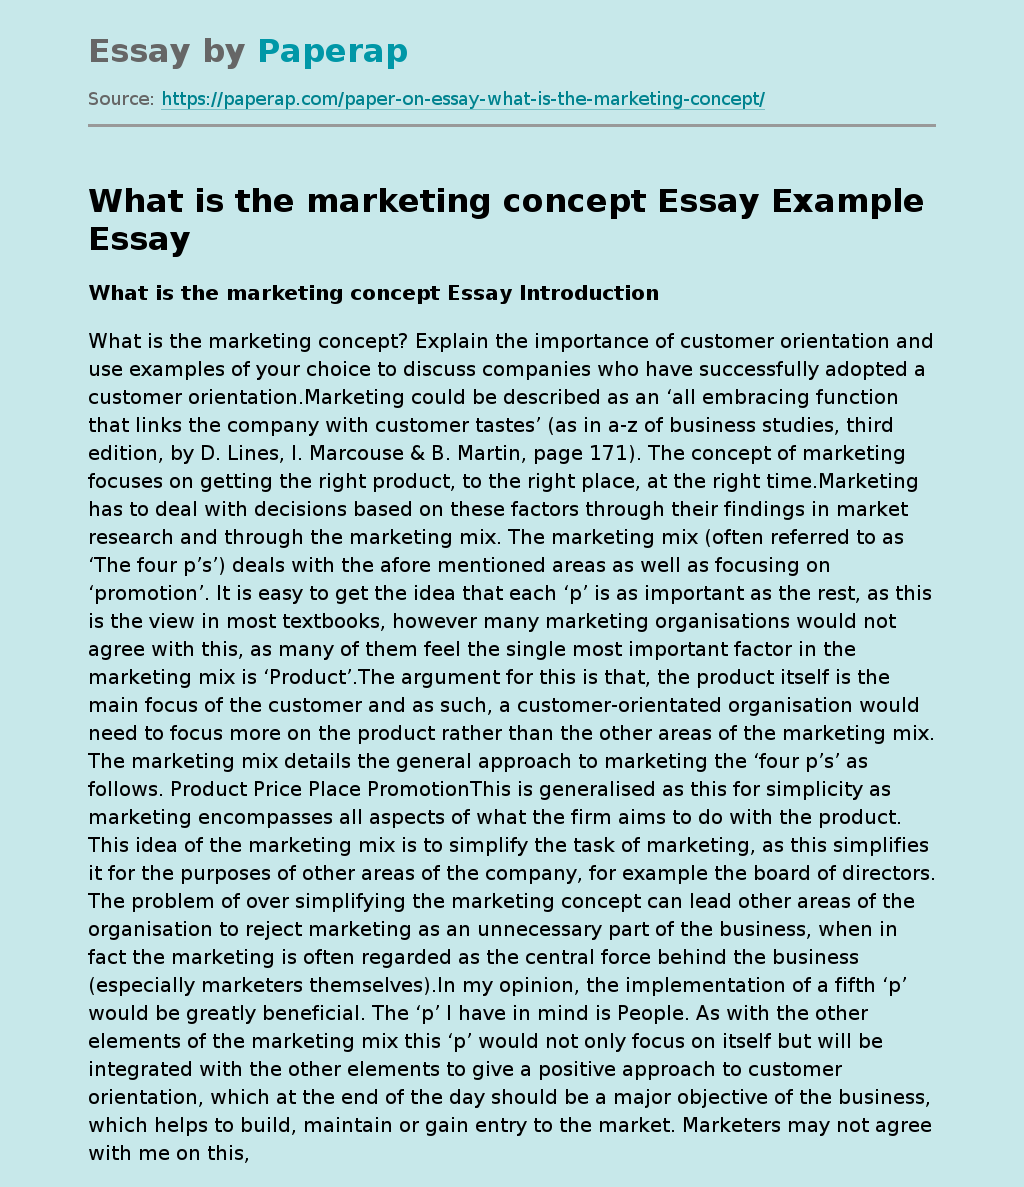 an essay about marketing concept